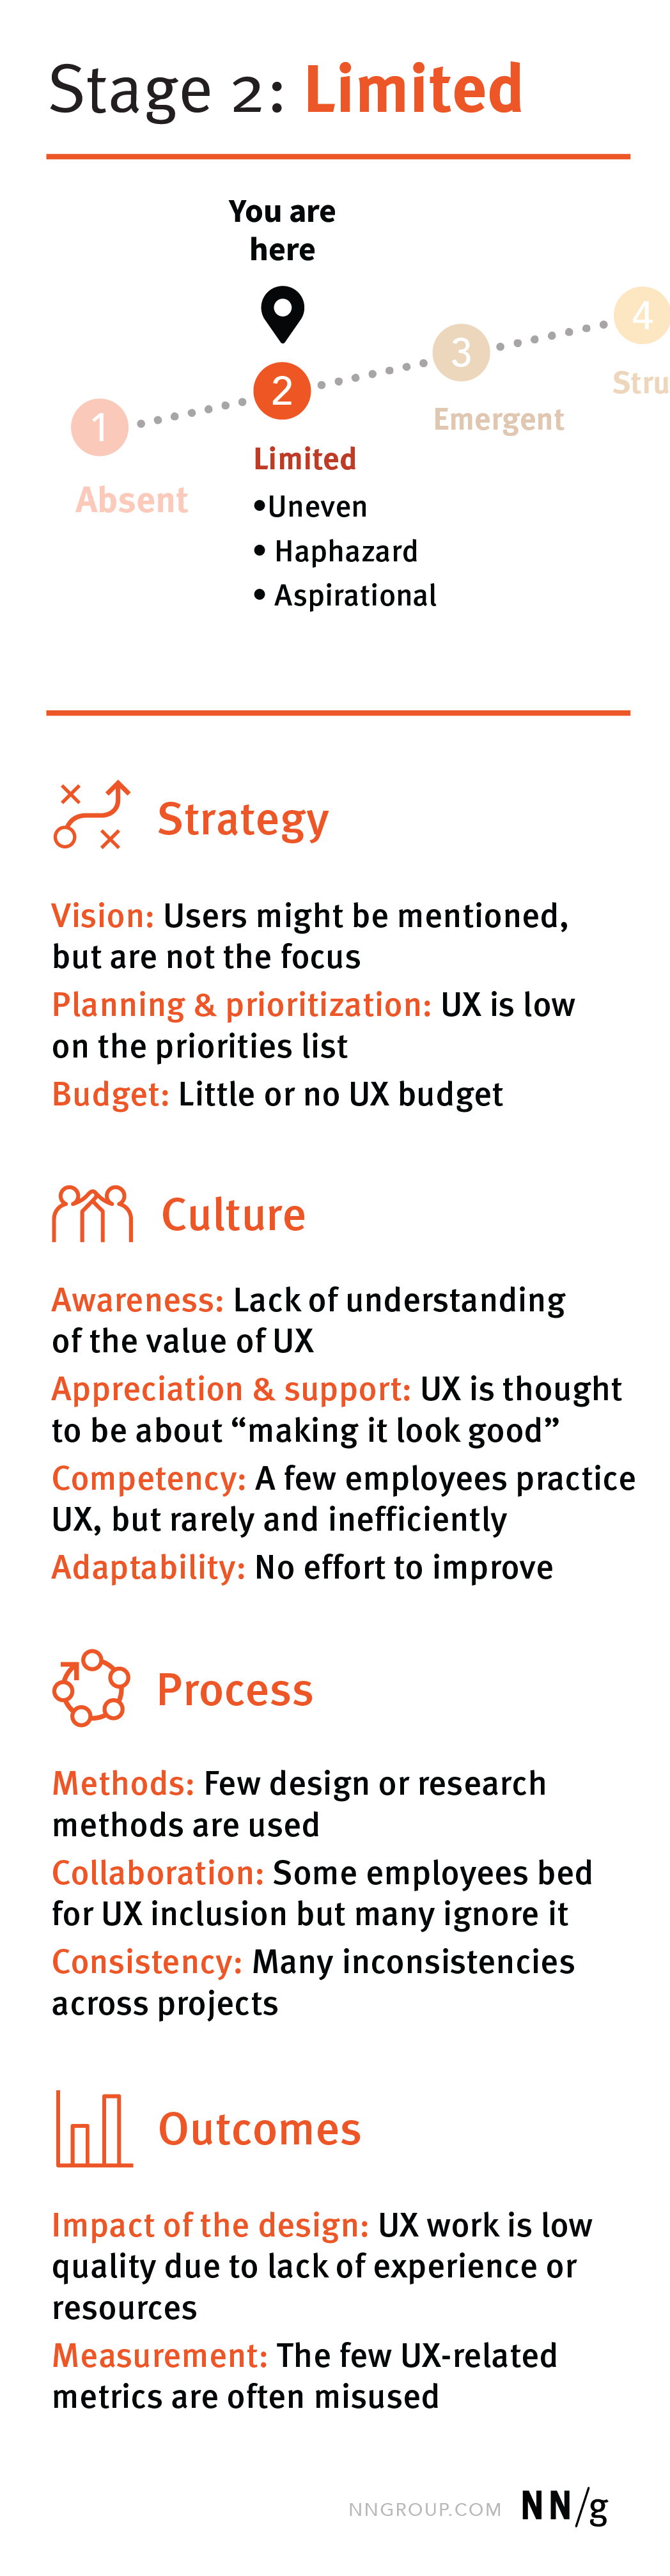 UX-Maturity Stage 2: UX is limited, haphazard, and aspirational.